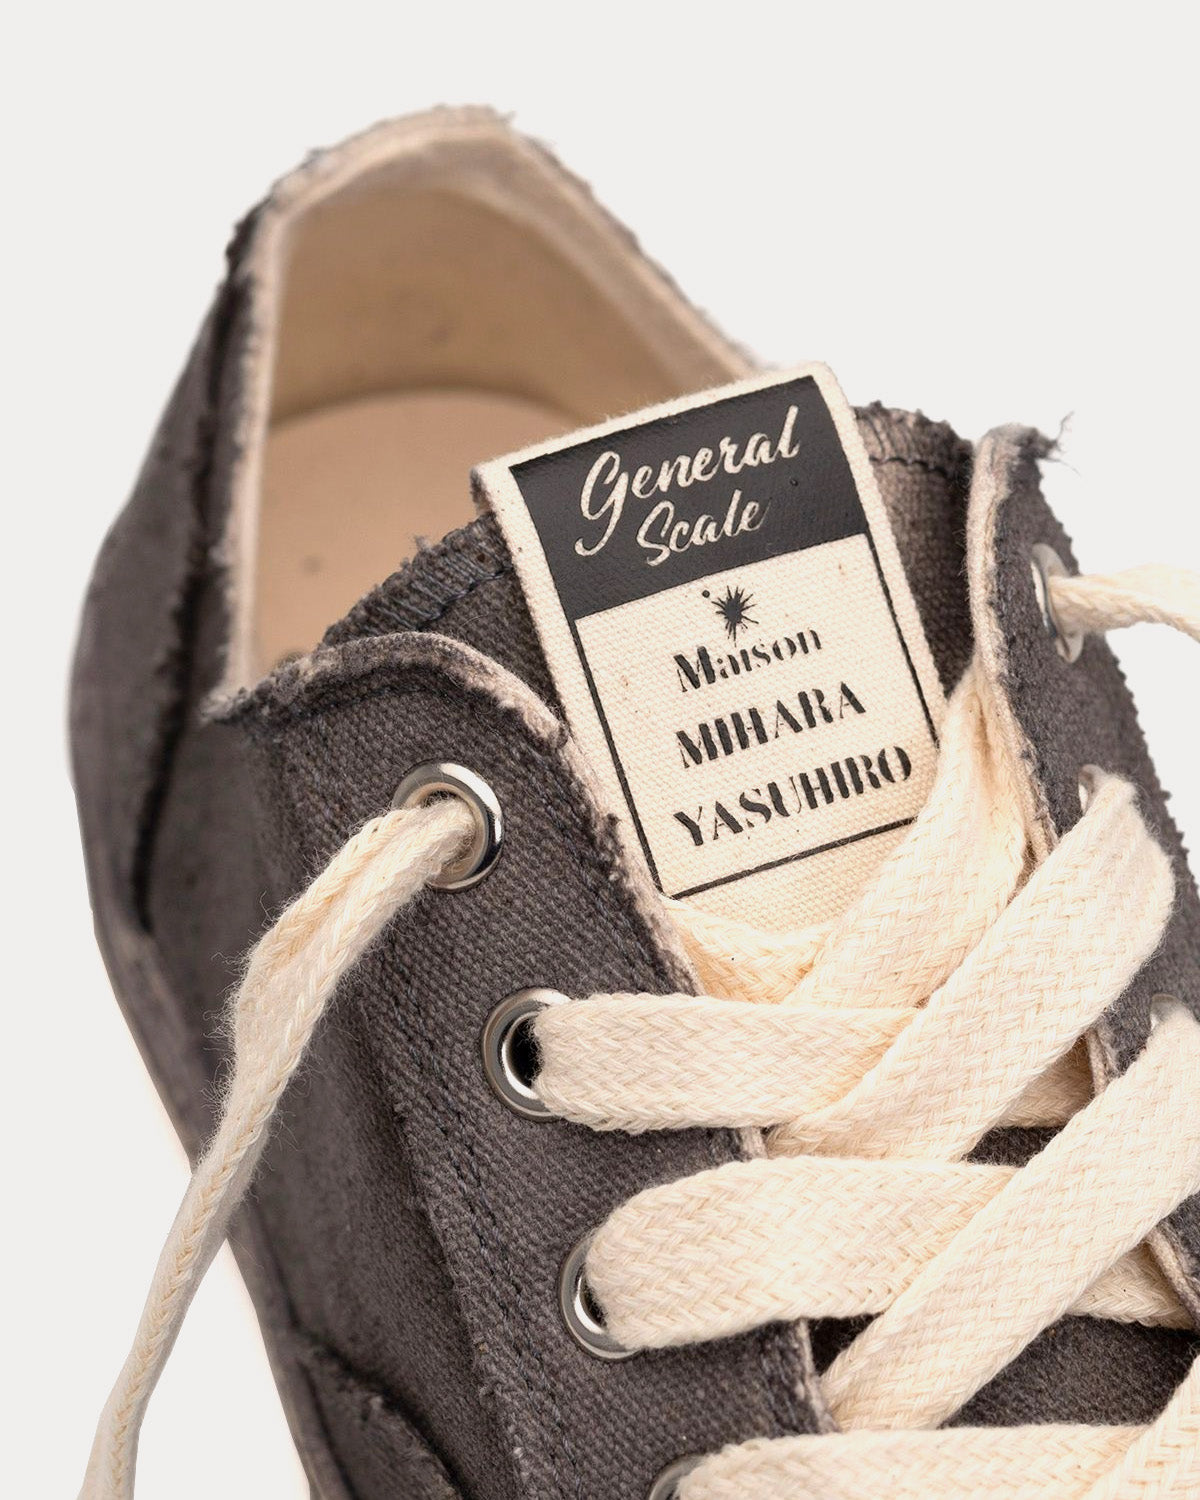 General Scale By Maison Mihara Yasuhiro - Past Sole Overdyed Canvas Black Low Top Sneakers